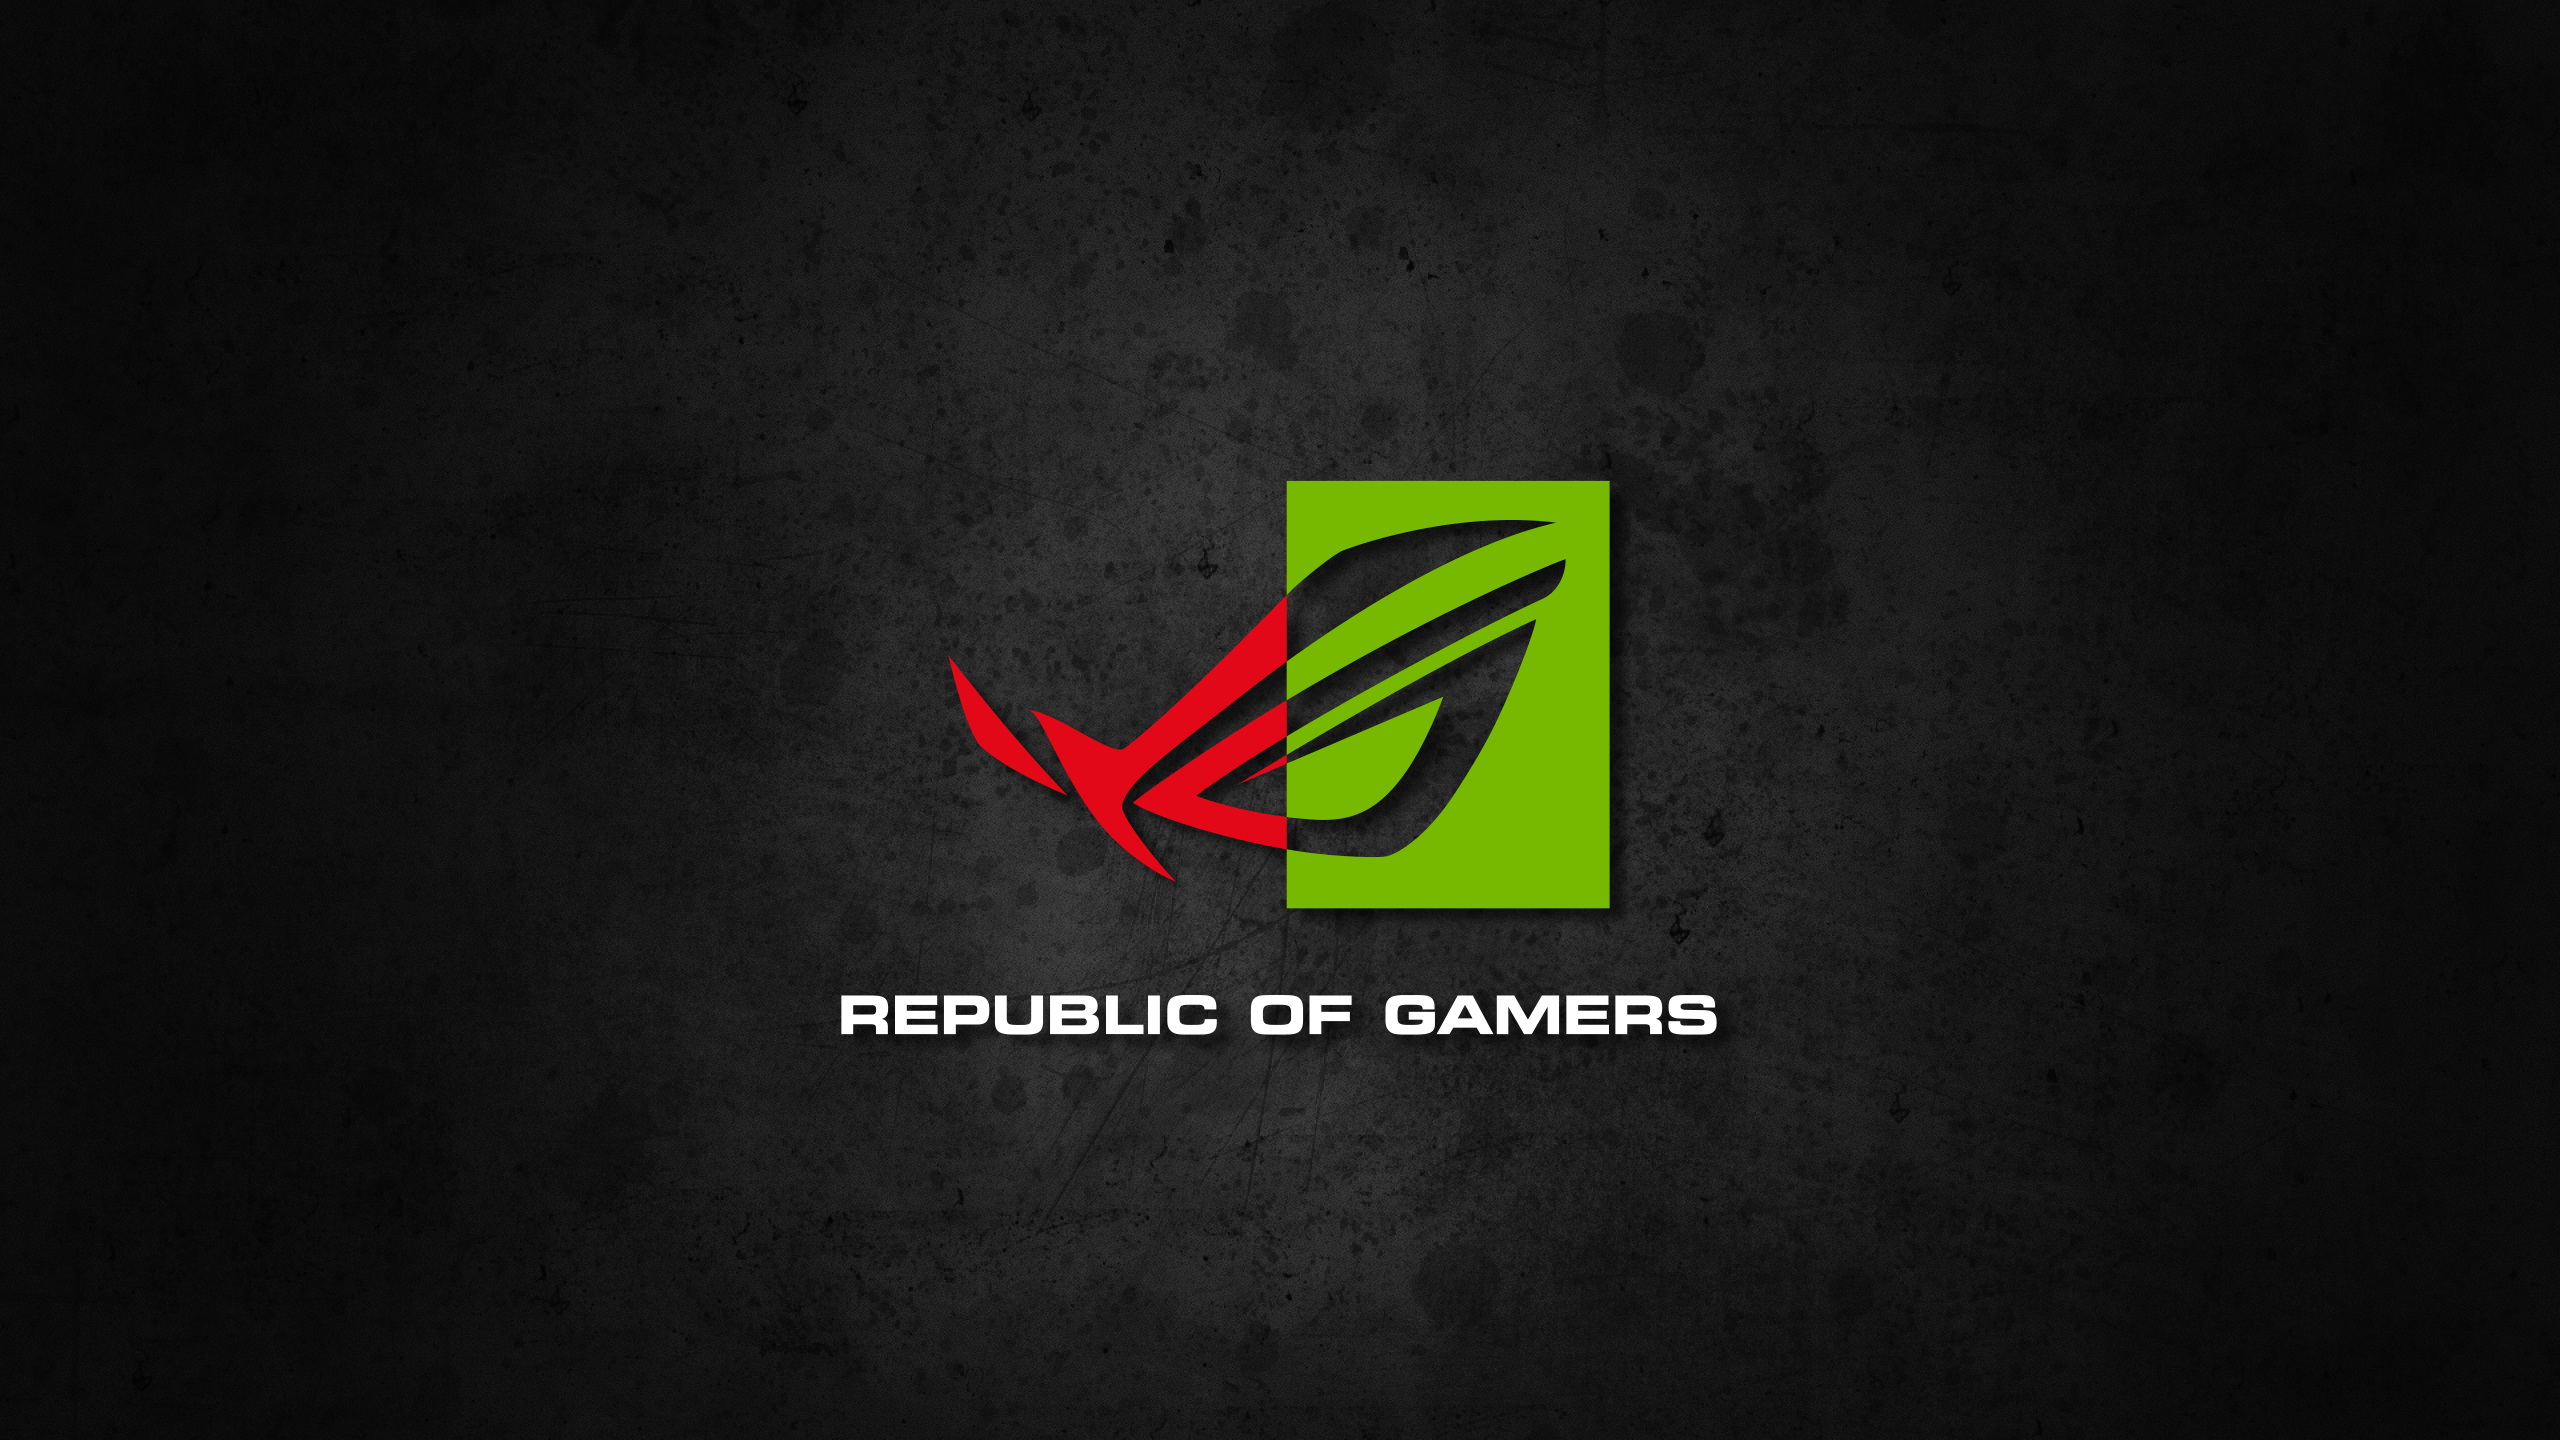 Republic of Gamers HD Backgrounds